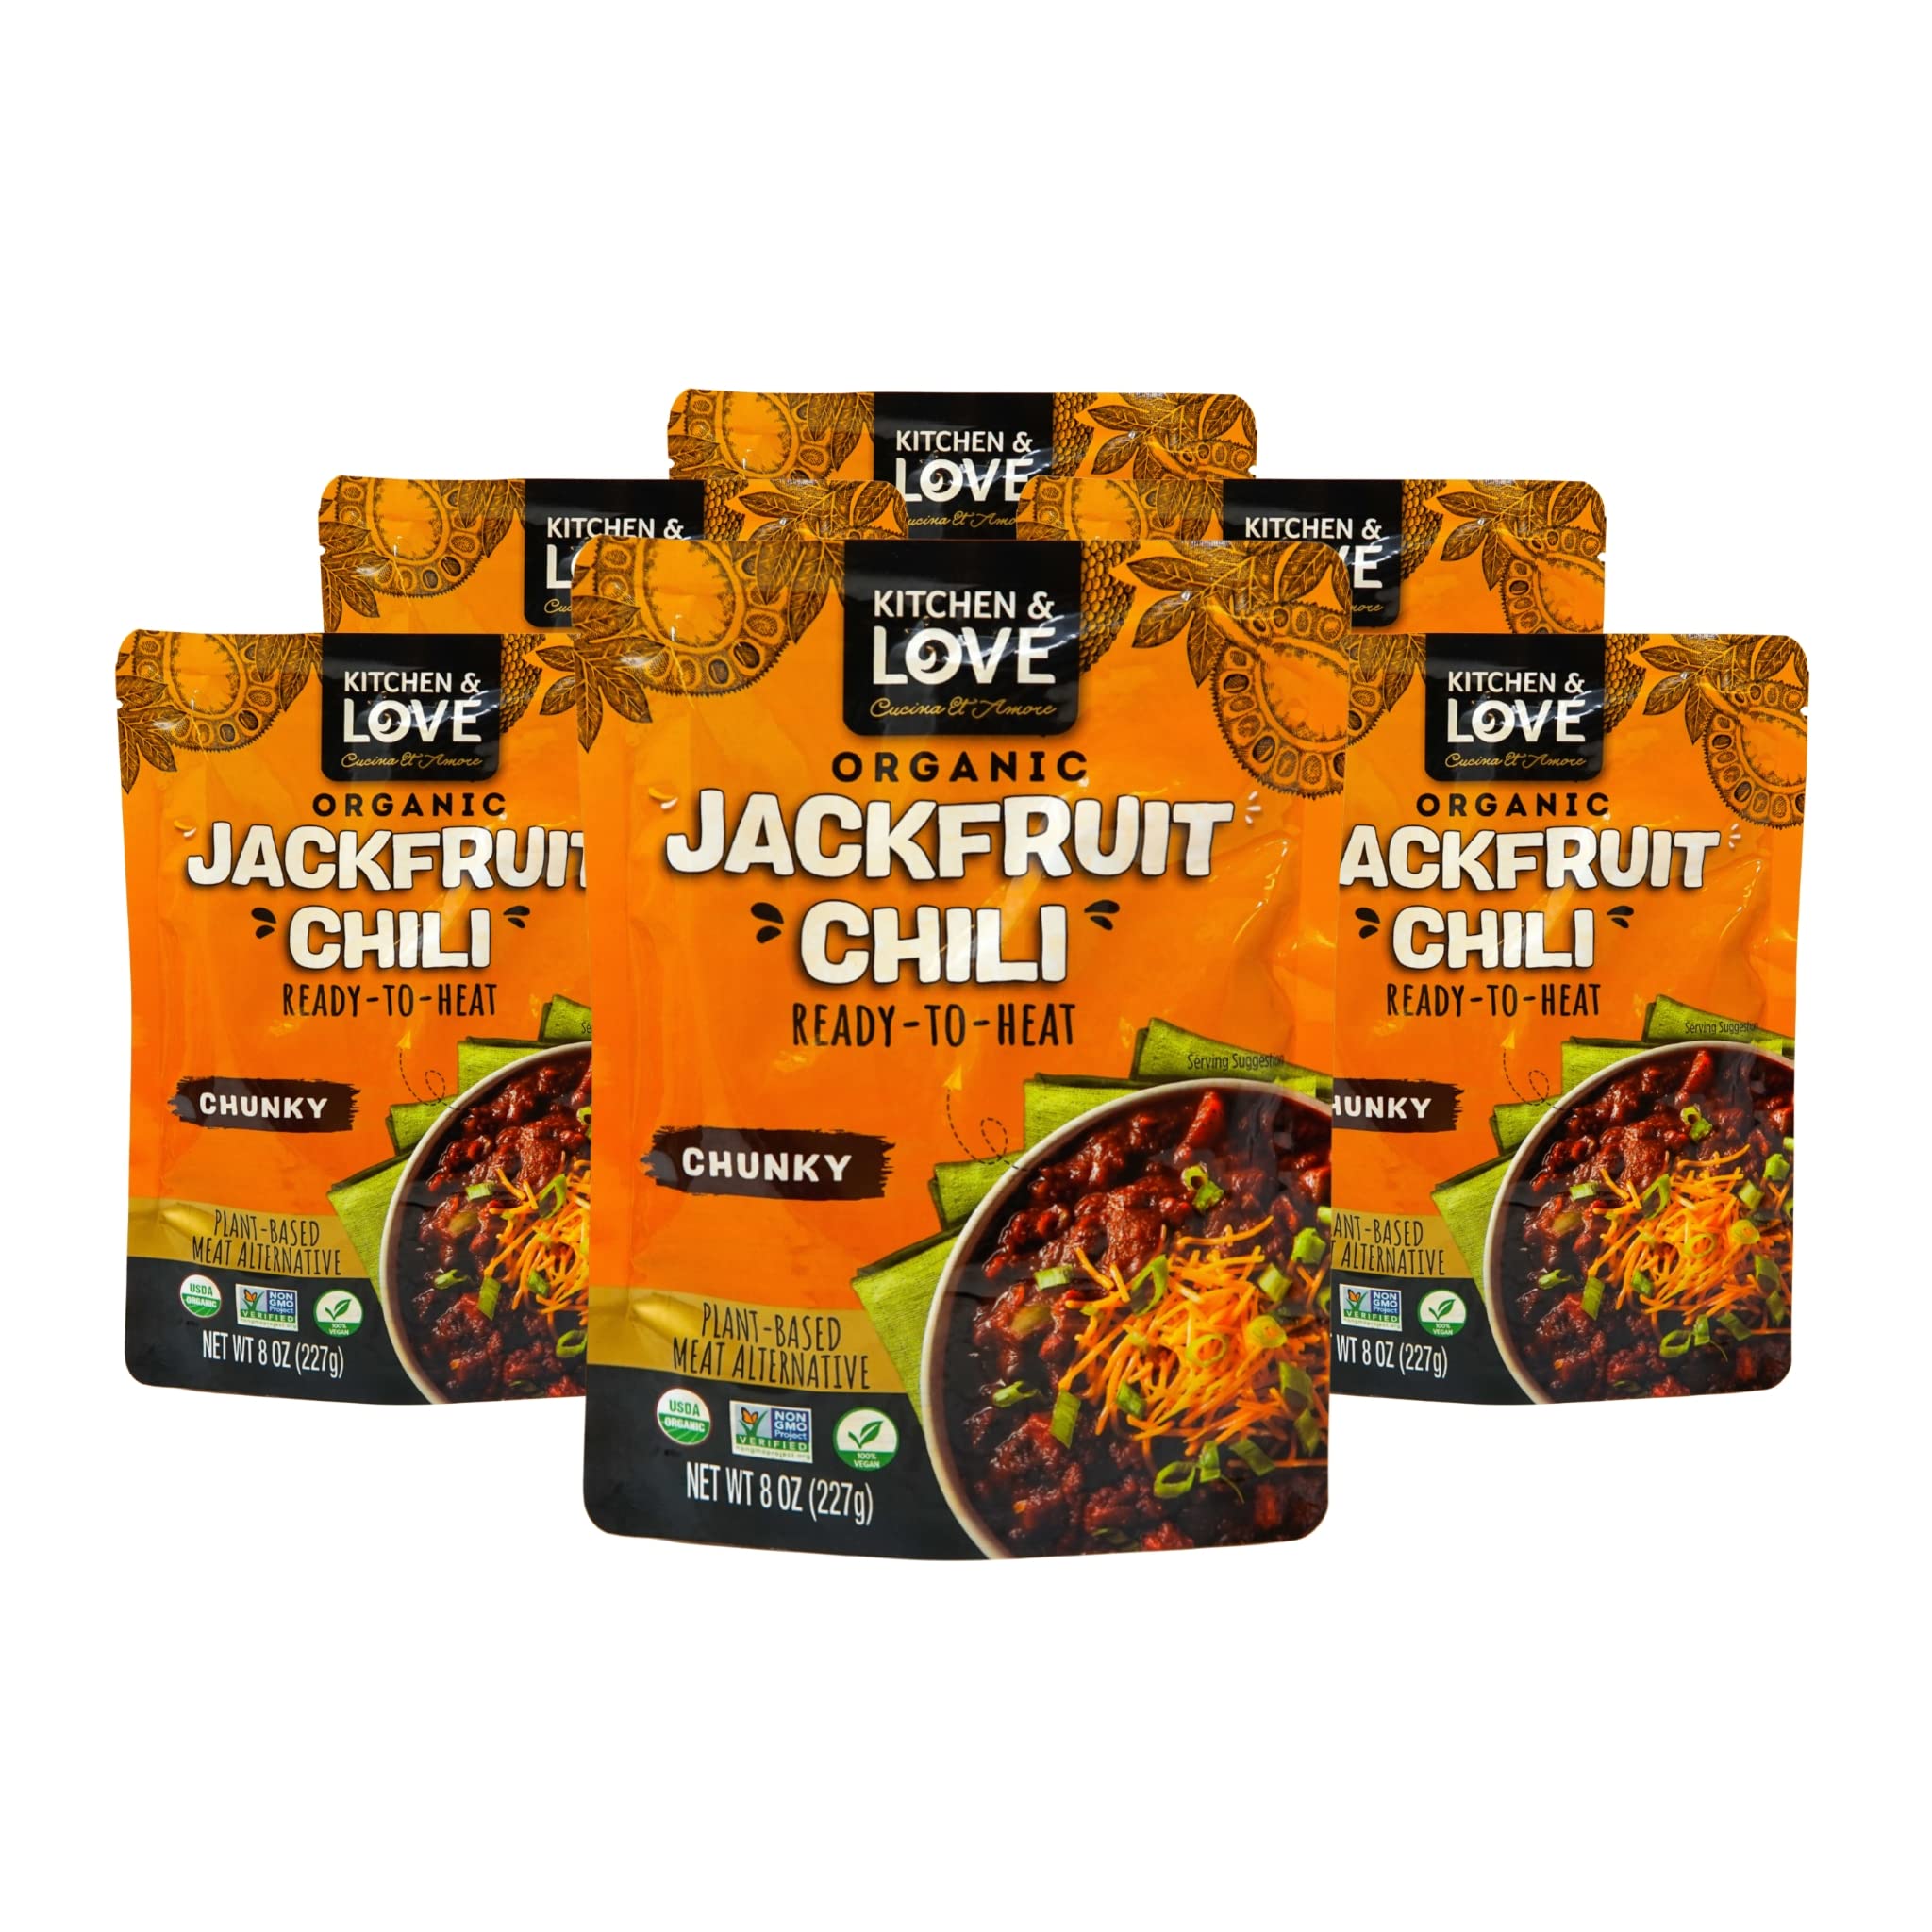 Kitchen & Love Jackfruit Chunky Chili, Organic, Fully Cooked, Versatile Plant Based Meat Alternative, Gluten Free, Ready in 90 seconds, High in Fiber, Non GMO Verified, Kosher, Vegan, Easy to Prepare Quick Meal 8 Oz (Pack of 6)